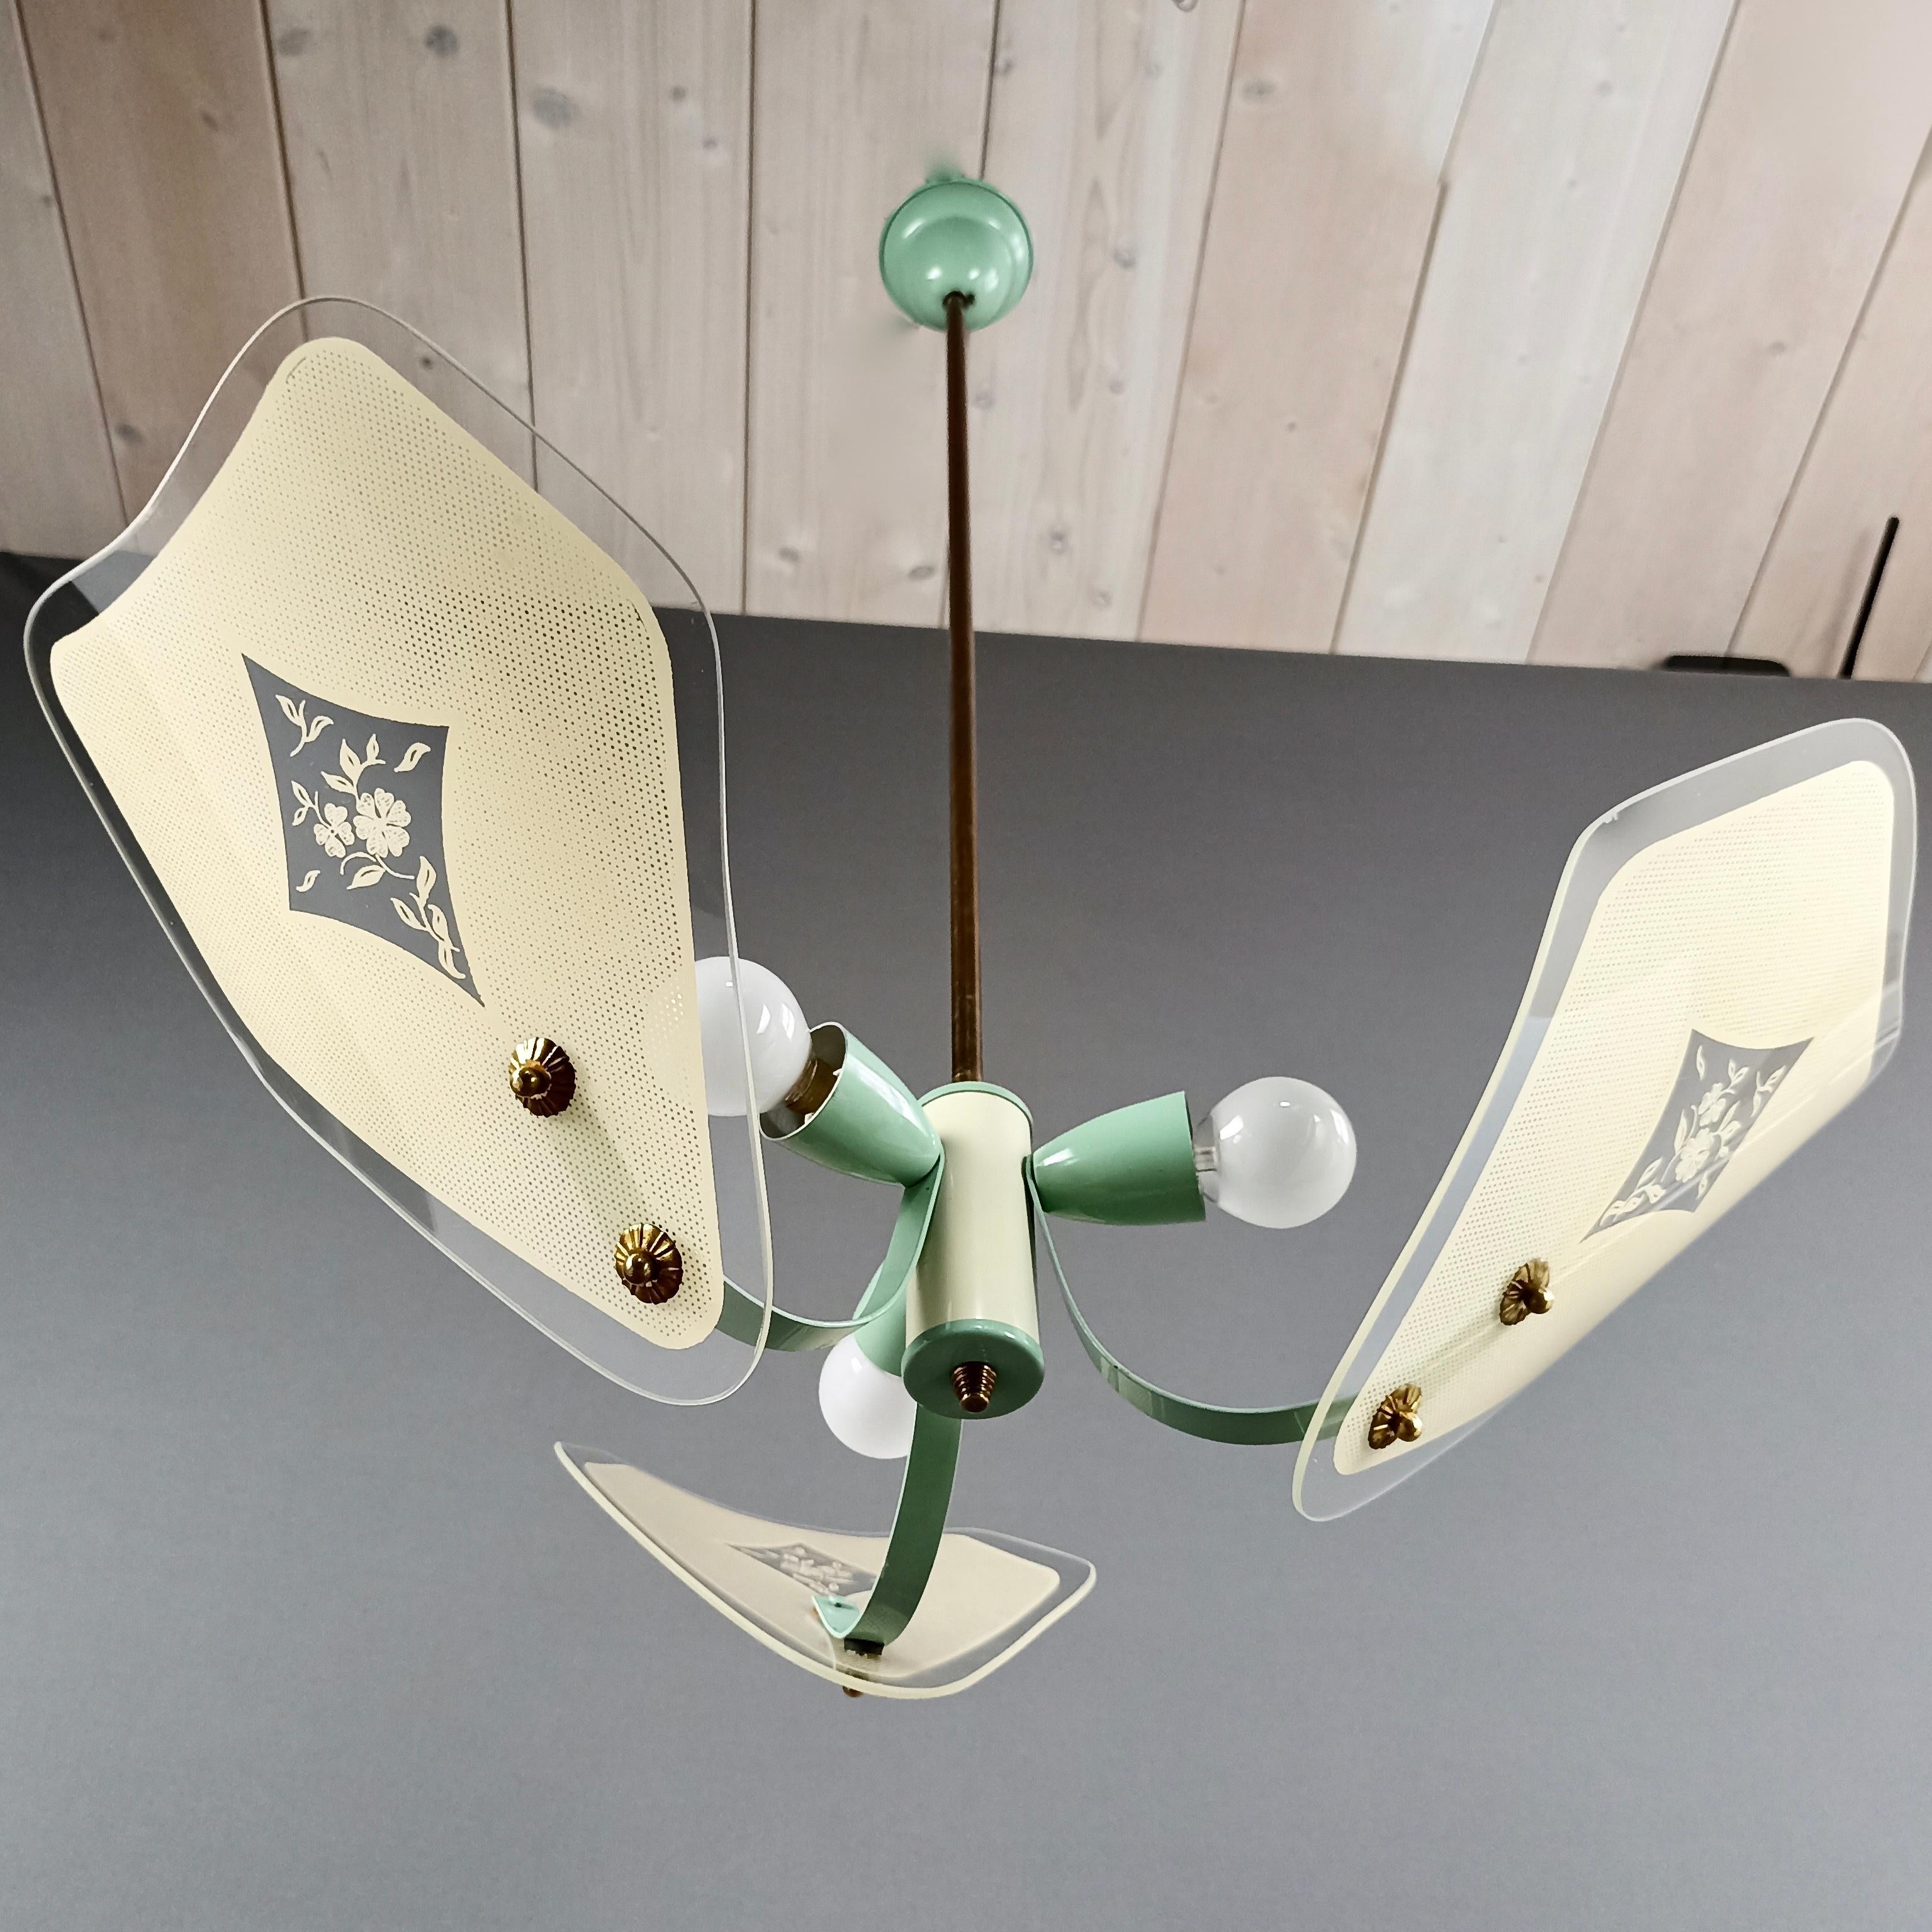 Italian 1950s Three-Light Lacquered Metal and Decorated Glass Shades Chandelier For Sale 3